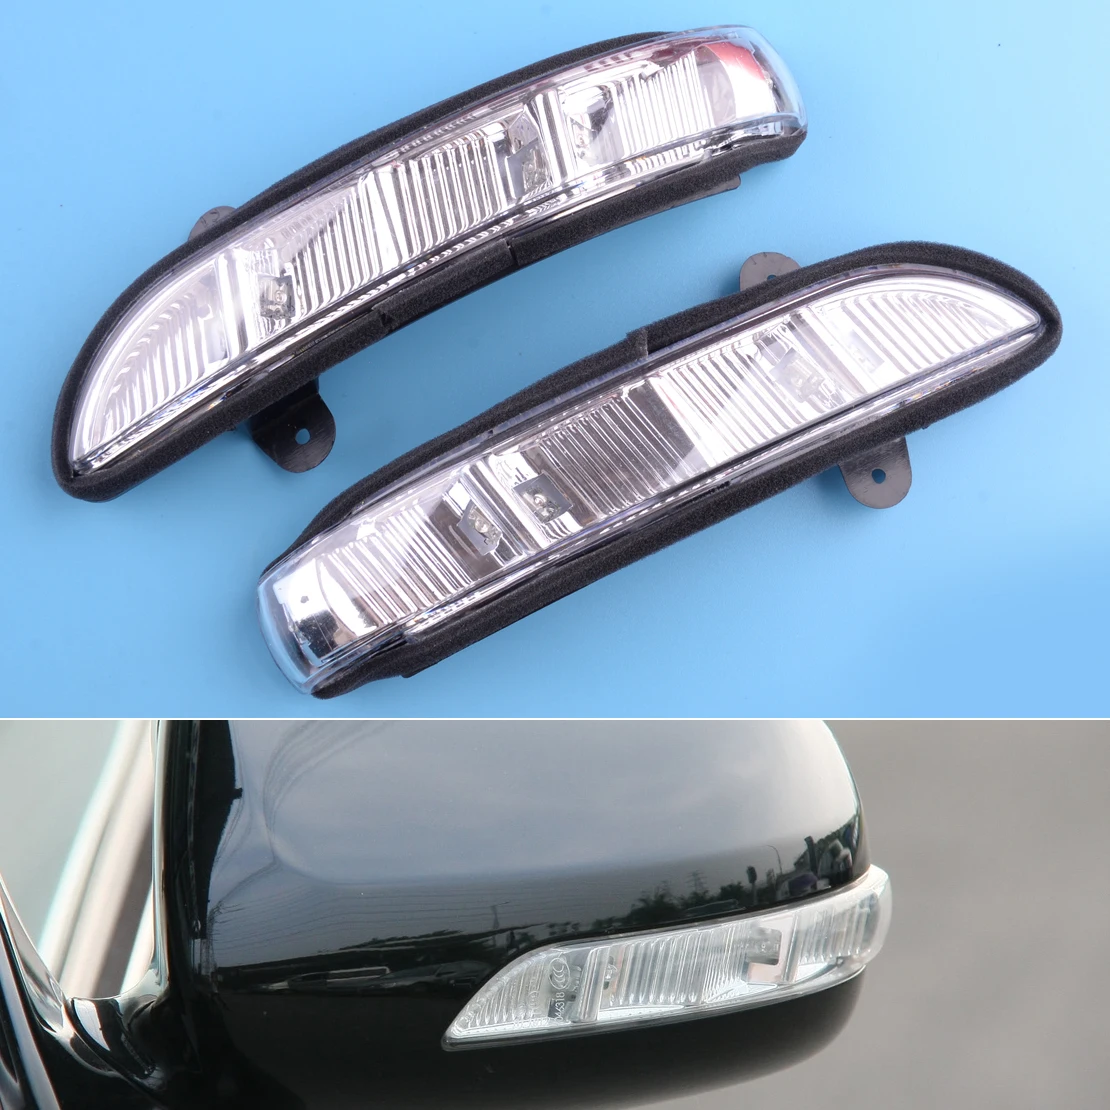 

1 Pair Side Door Wing Rearview Mirror LED Turn Signal Light Fit for Benz CL W216 CLS W219 S W221 E Class W211 2198200621